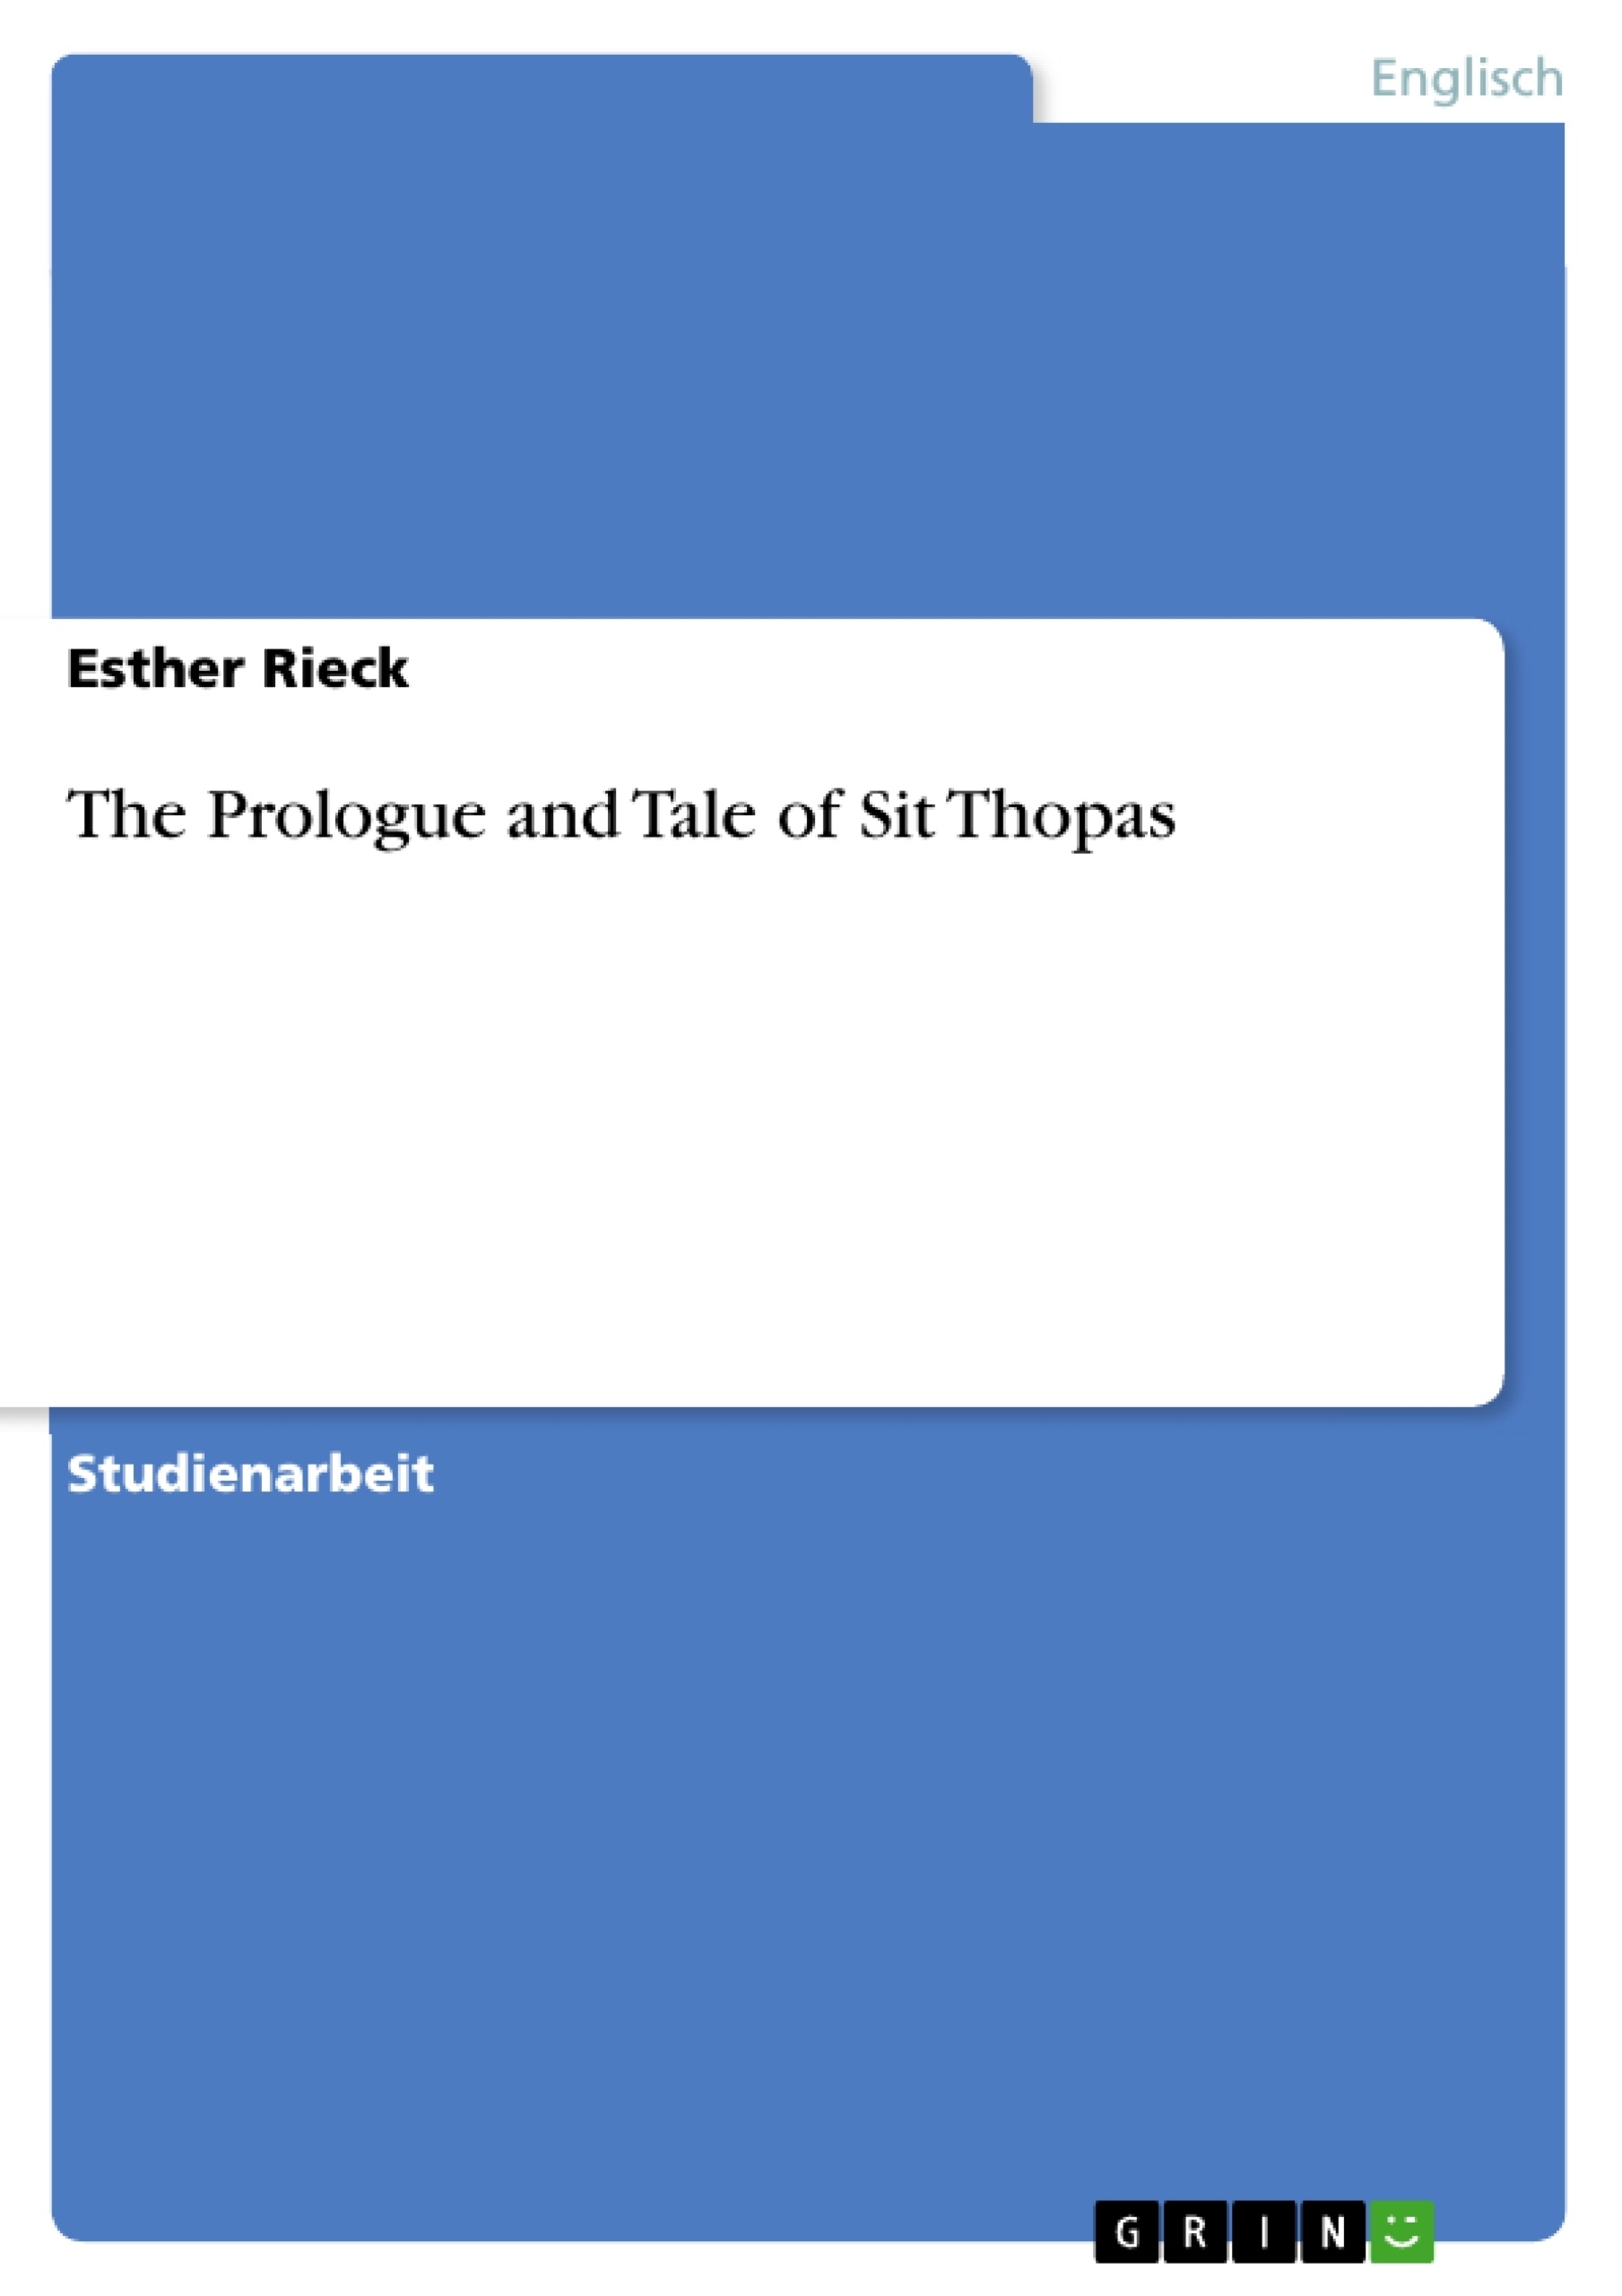 Titre: The Prologue and Tale of Sit Thopas